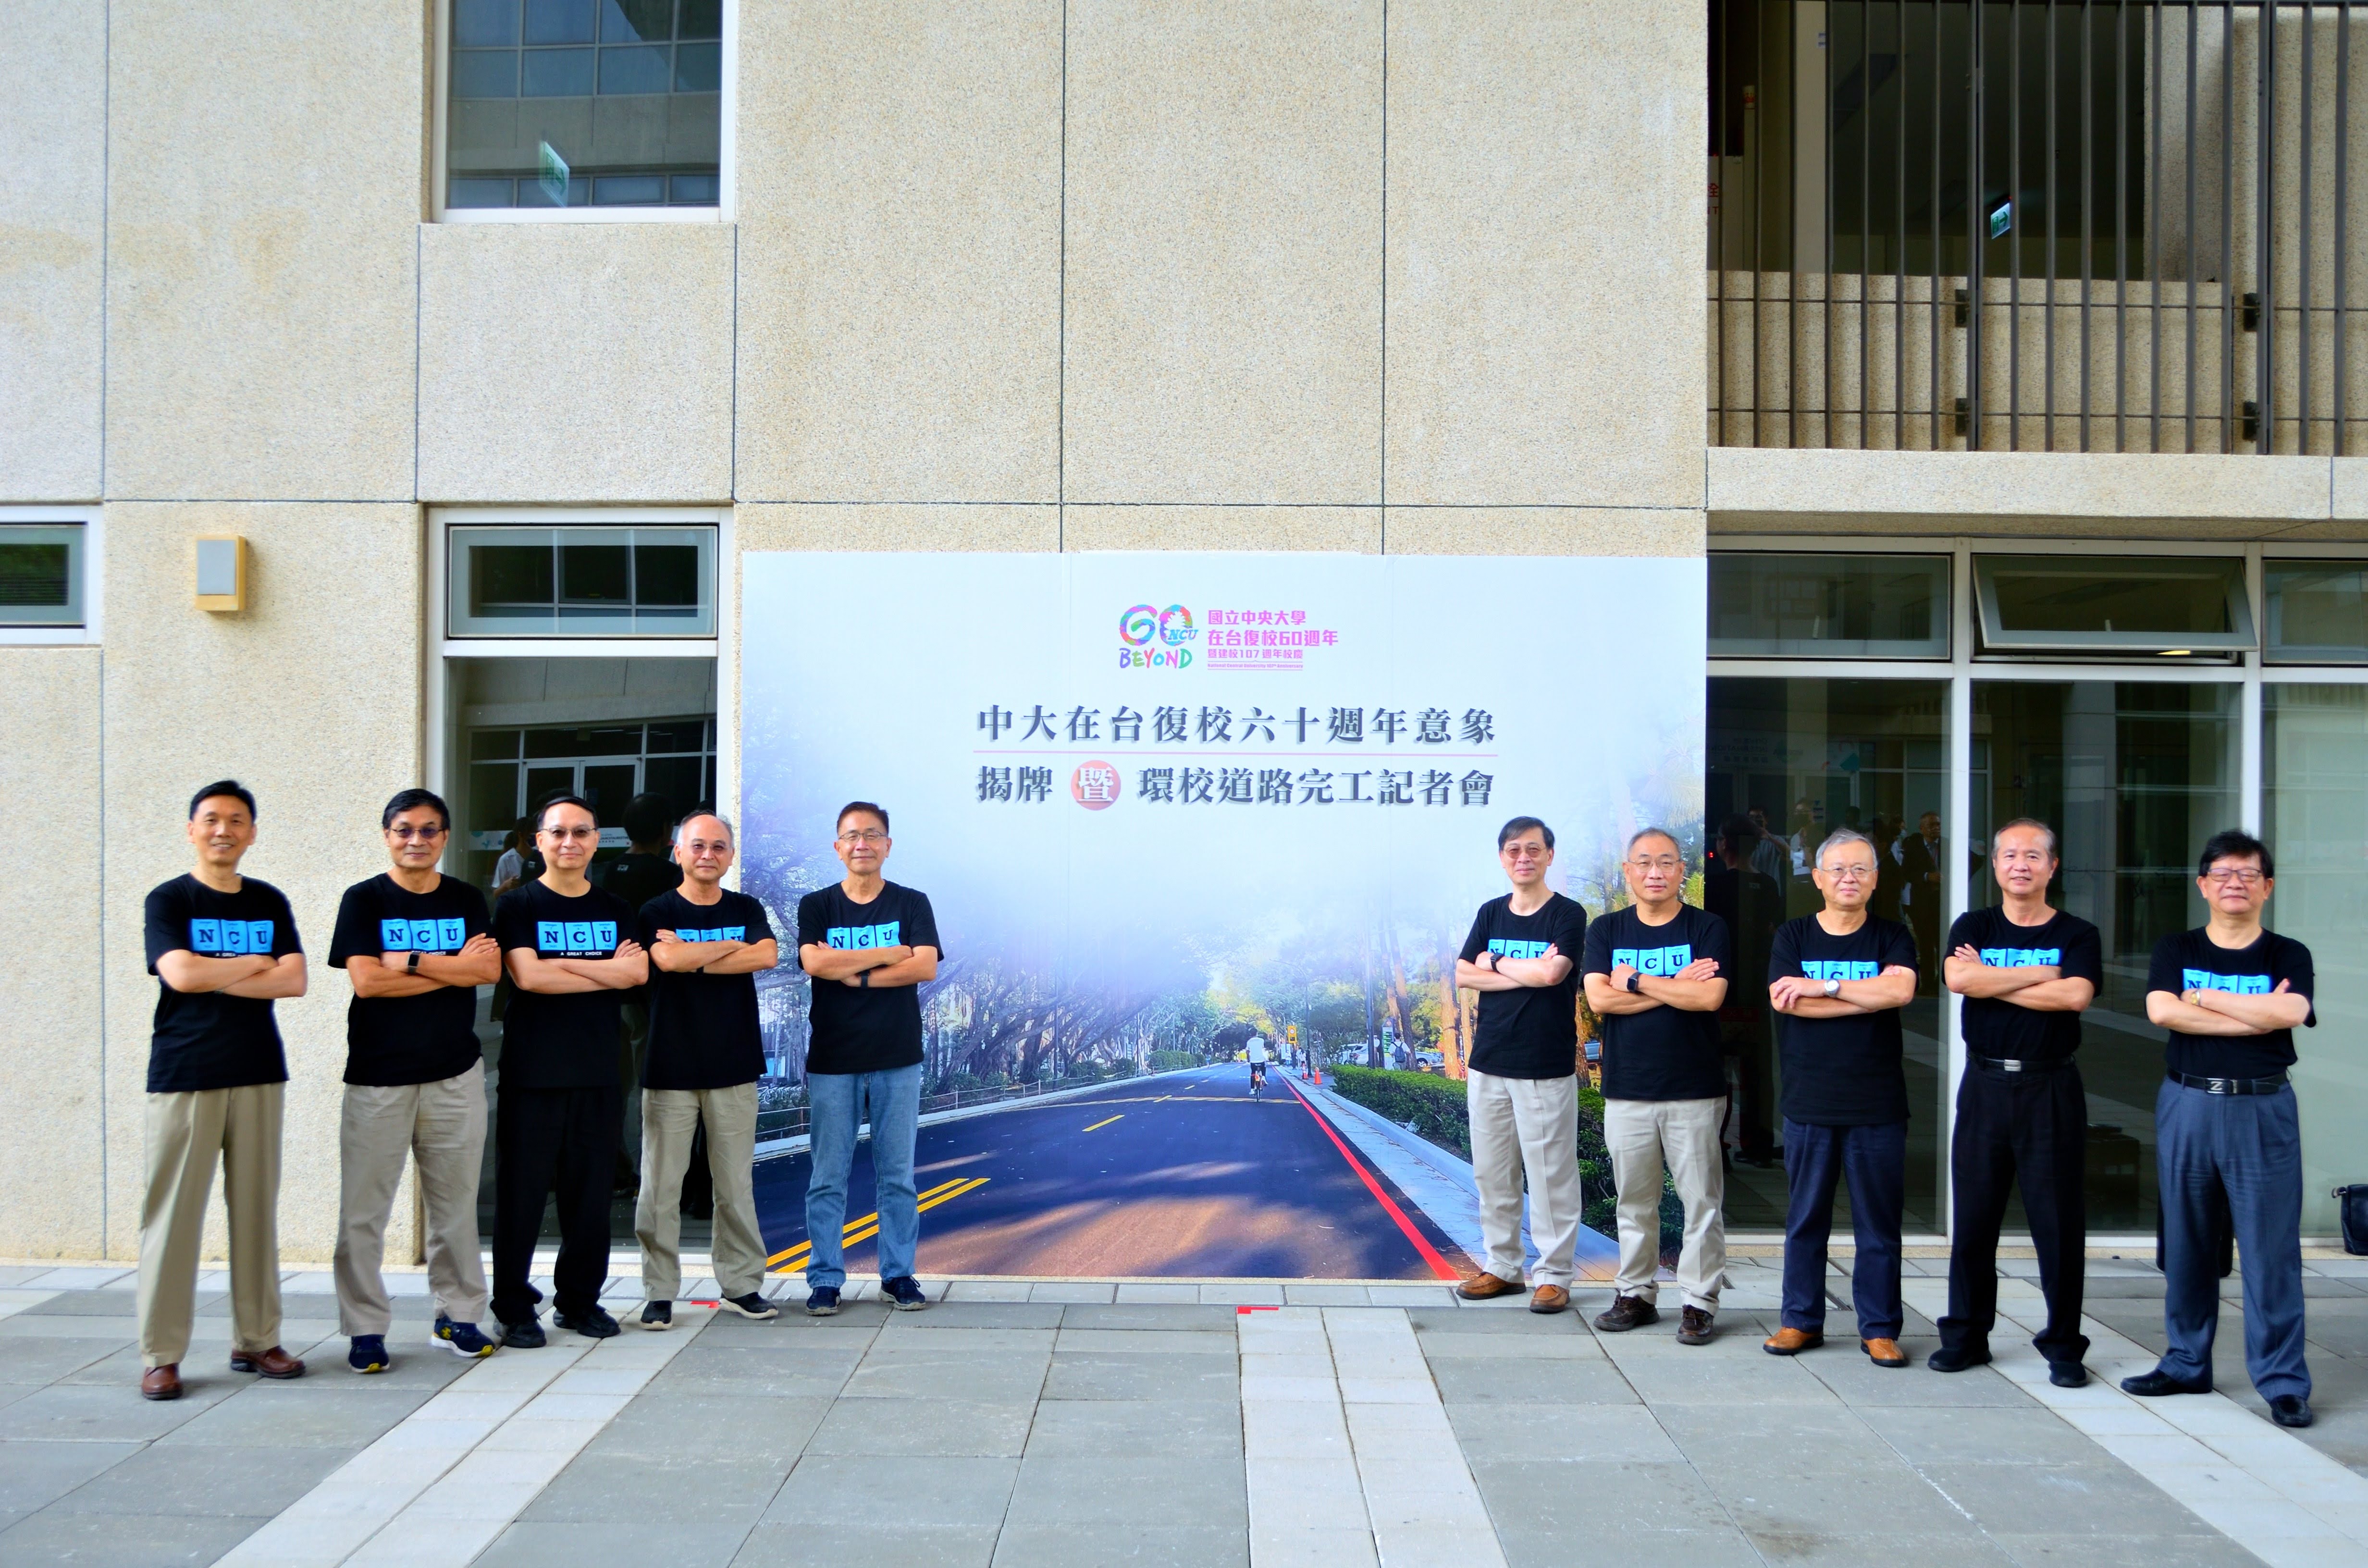 A New Circuit Surrounding NCU Was Completed in Celebration of the 60th Anniversary of NCU's Re-establishment in Taiwan